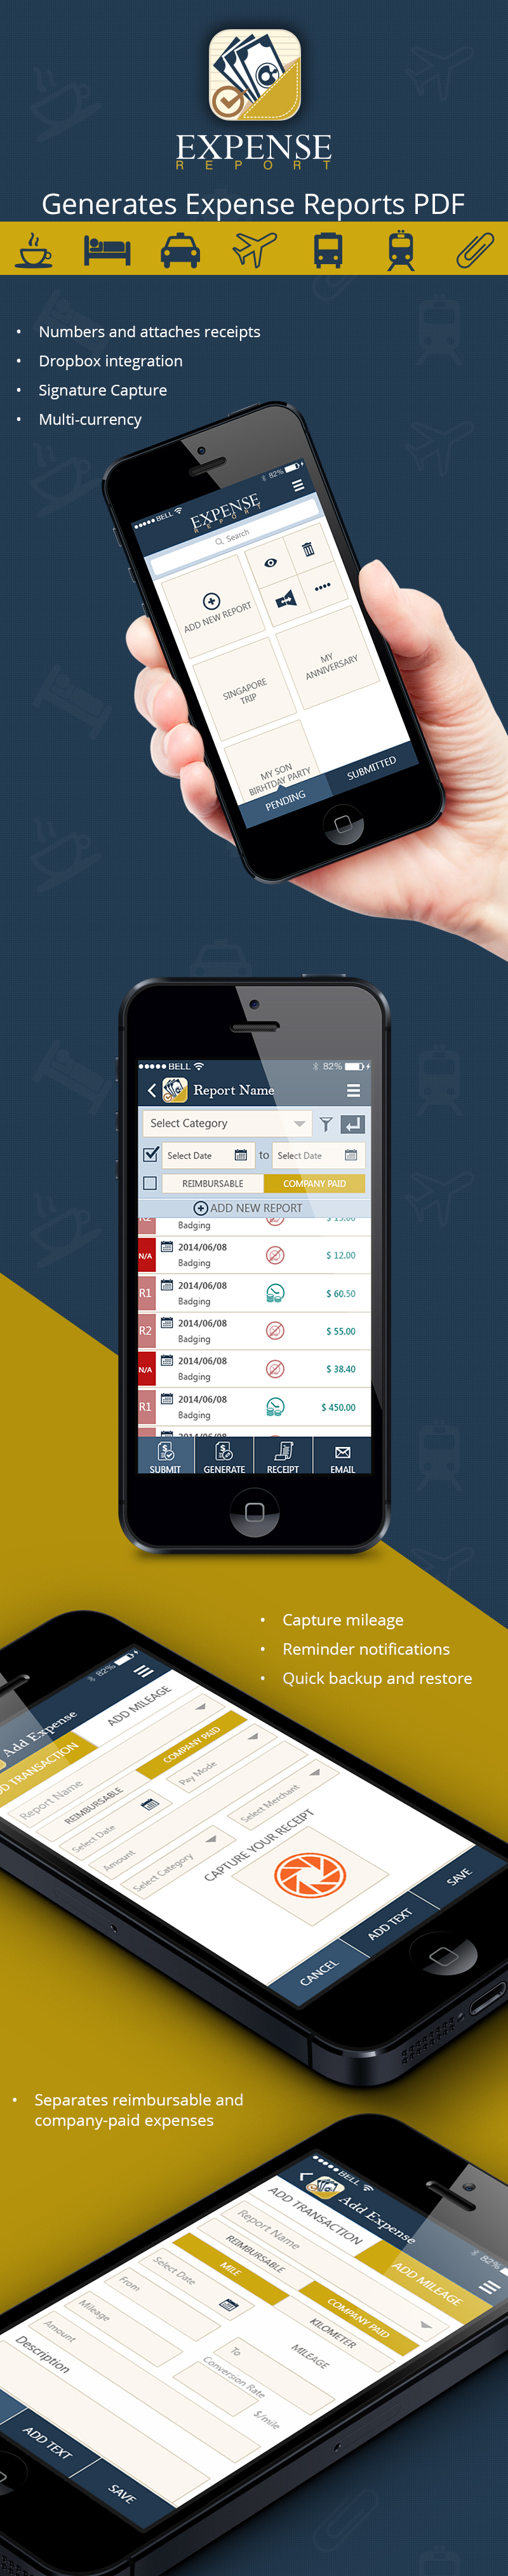 mobile app design screen UI ux expense manager report